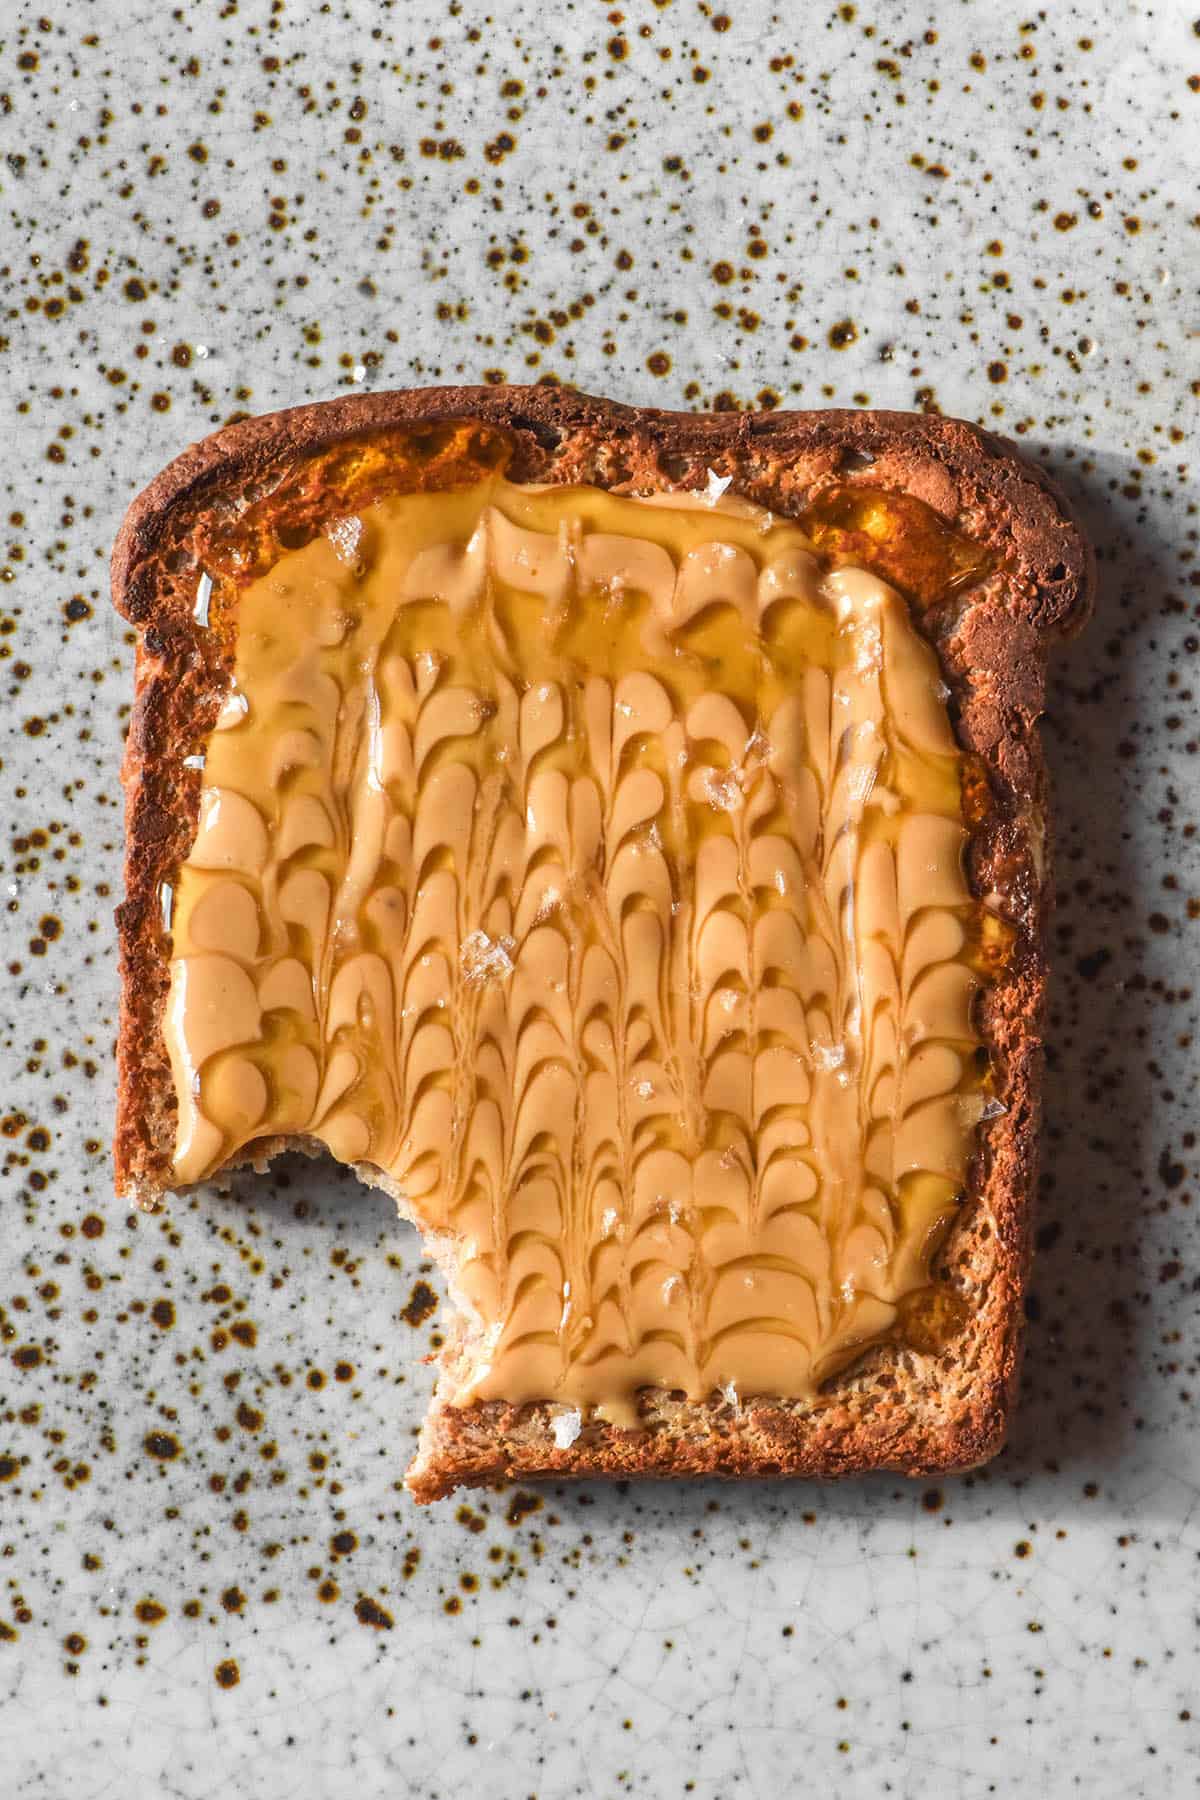 An aerial image of a slice of gluten free vegan high protein toast topped with peanut butter swirled with rice malt syrup. The toast sits atop a white speckled ceramic plate and a bite has been taken from the lower left half of the bread